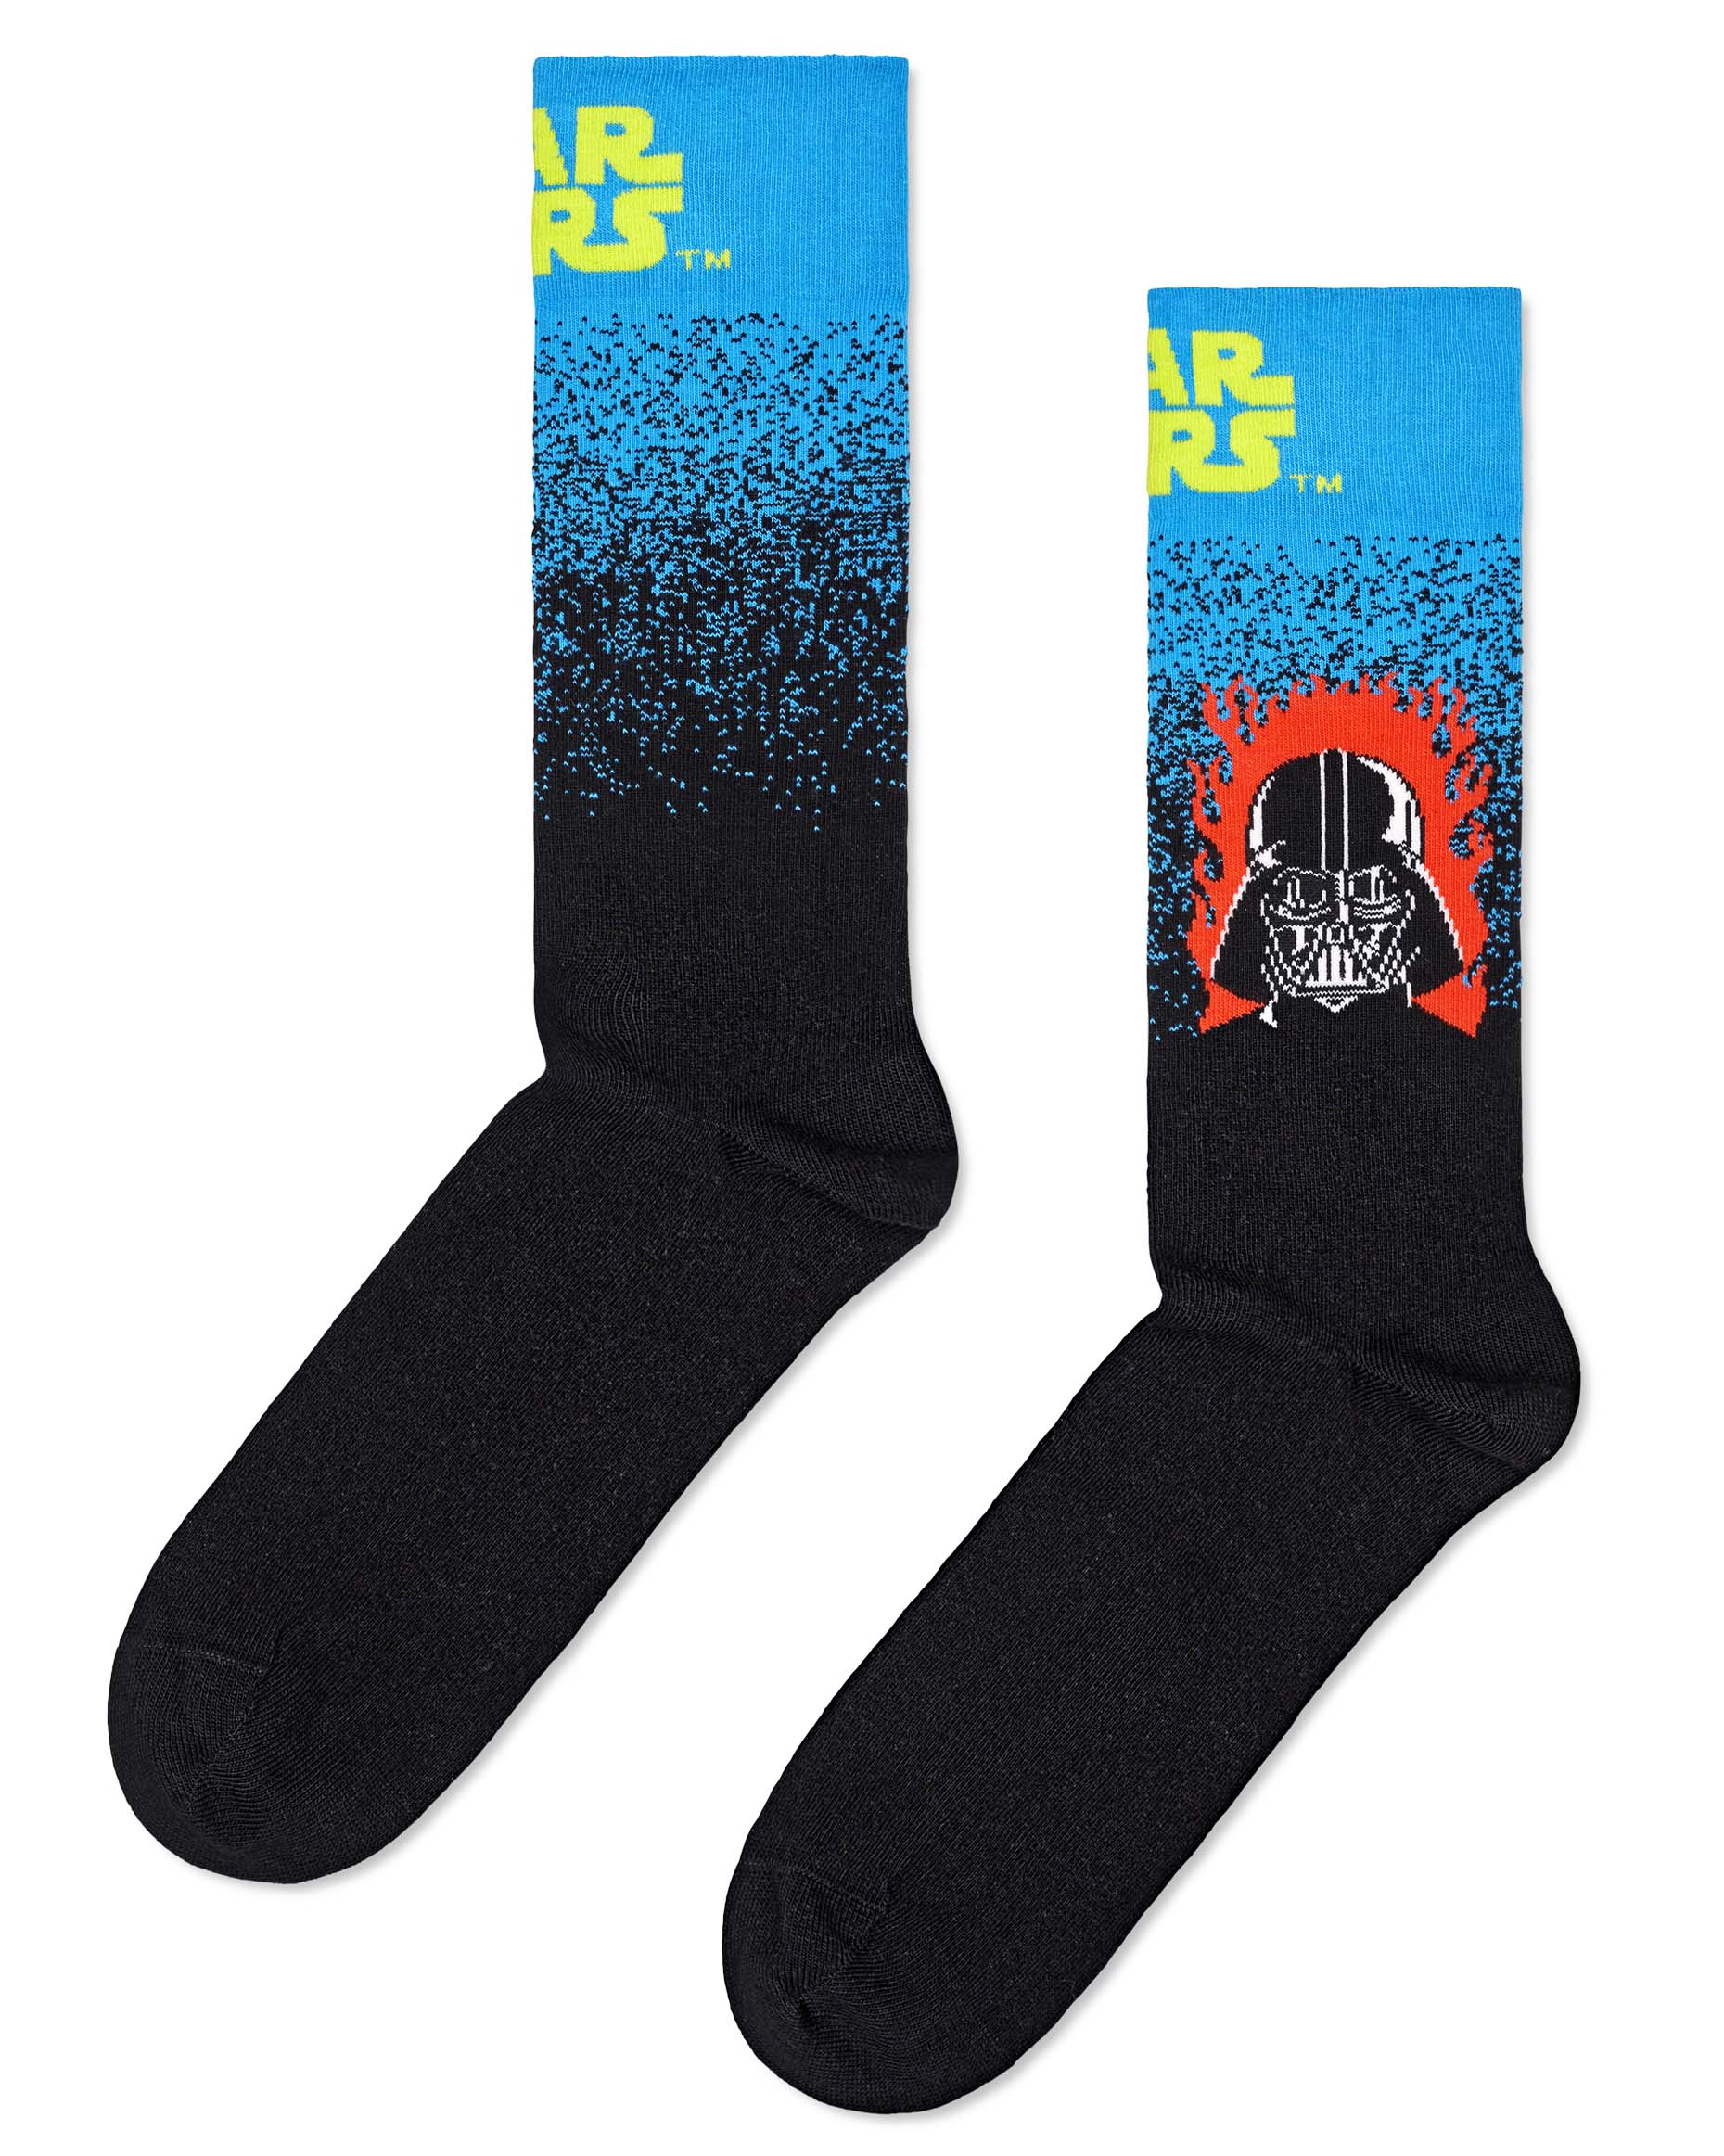 Happy Socks P000275 Darth Vader Sock - Cotton crew socks with an ombre/gradient effect going from blue on the top to black with a Darth Vader motif with flames in red, black and white and Star Wars logo in bright neon green.